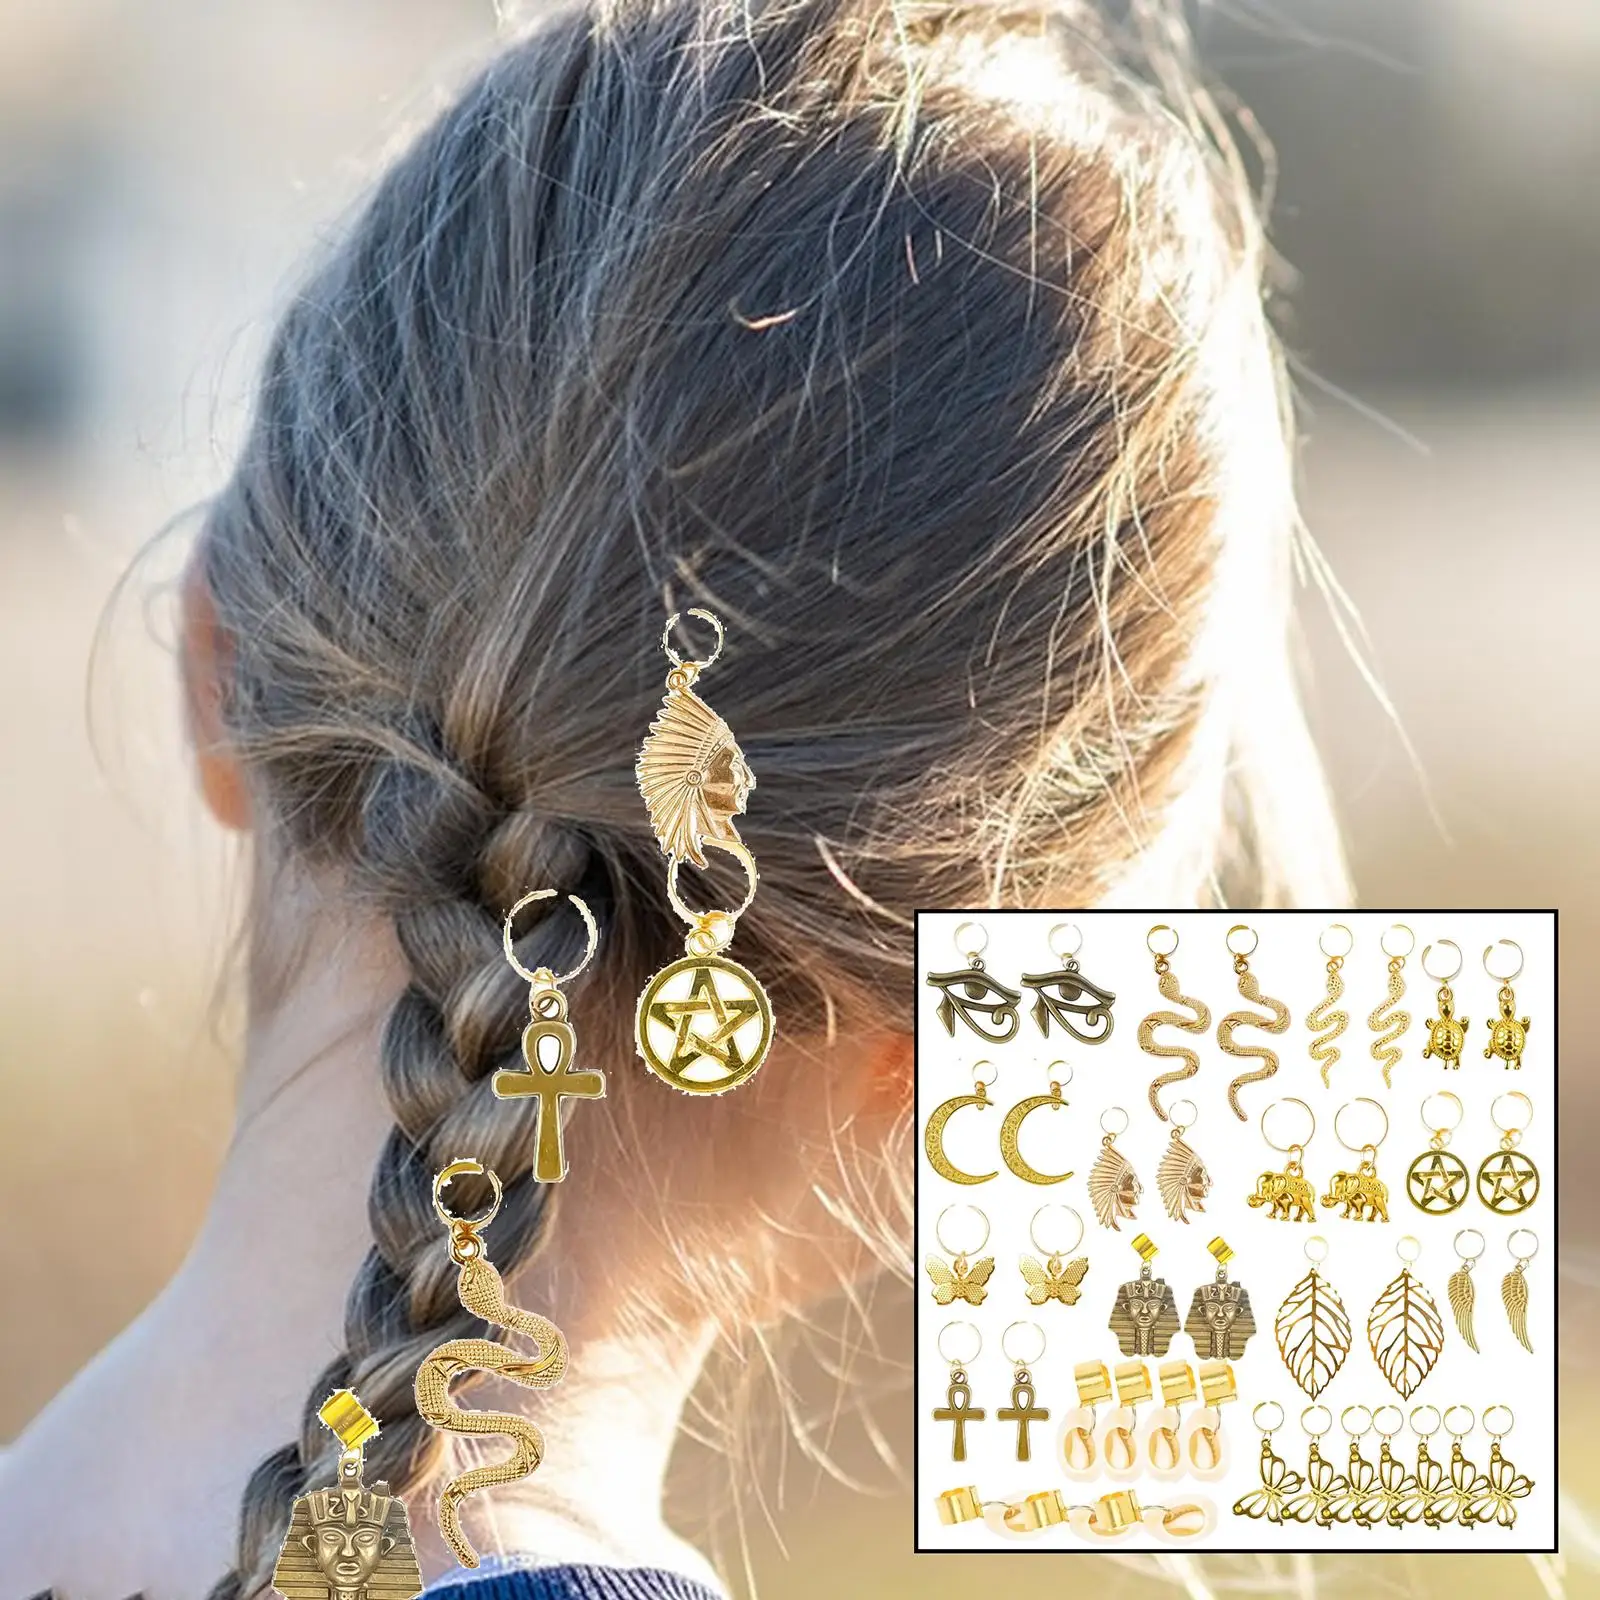 40 Count Jewelry Braids Hair Clips Dreadlocks Hair Charms Reusable Exquisite